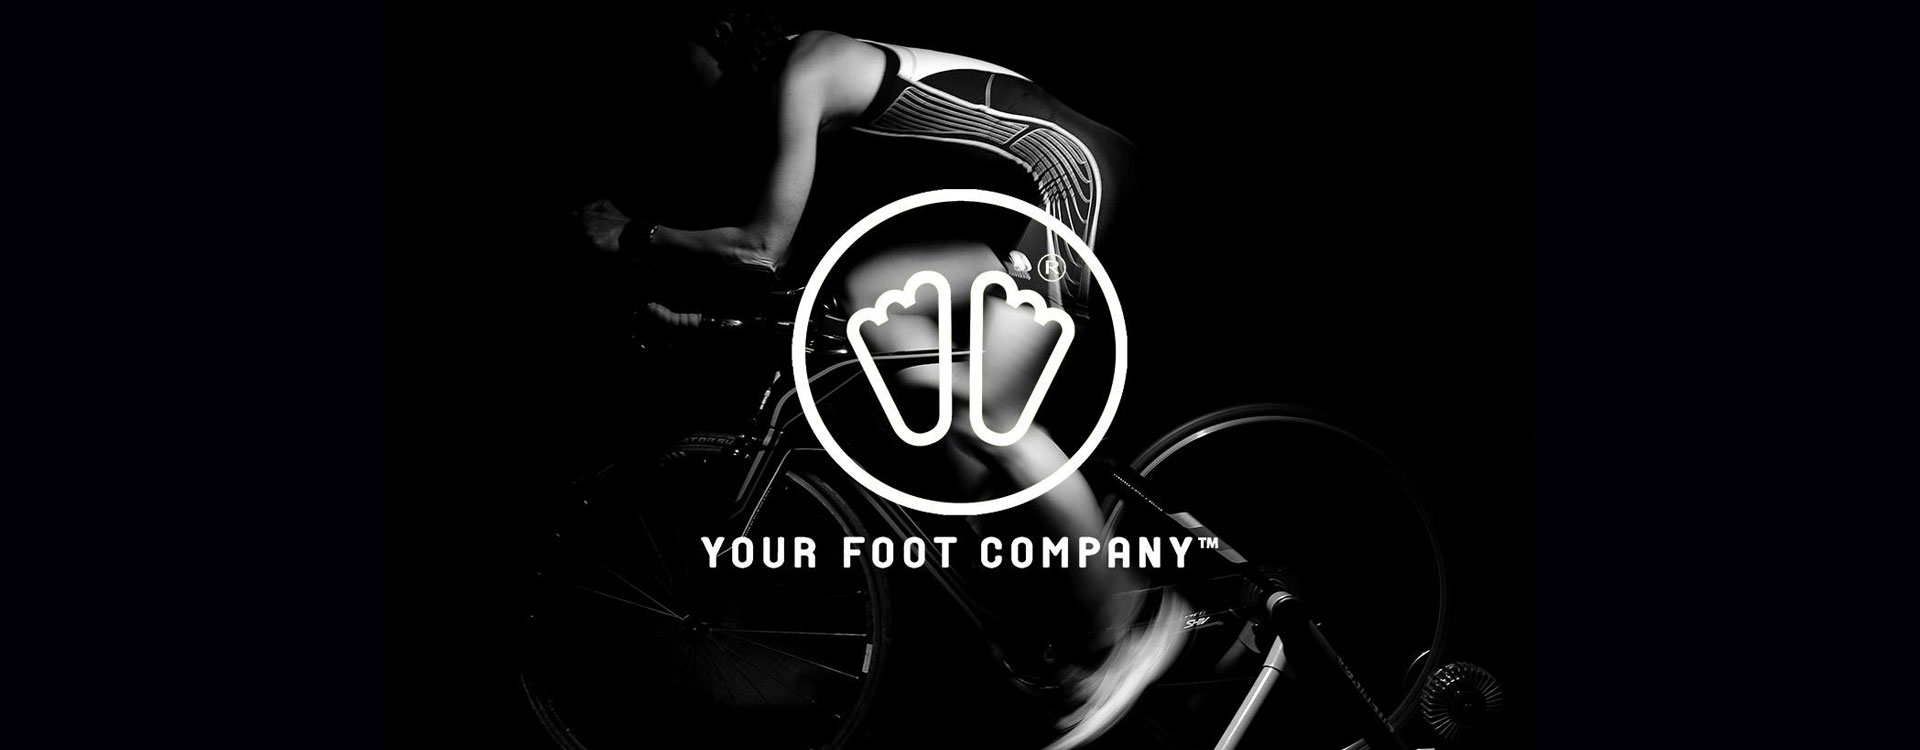 HOW DOES CYCLING IMPACT THE FOOT?